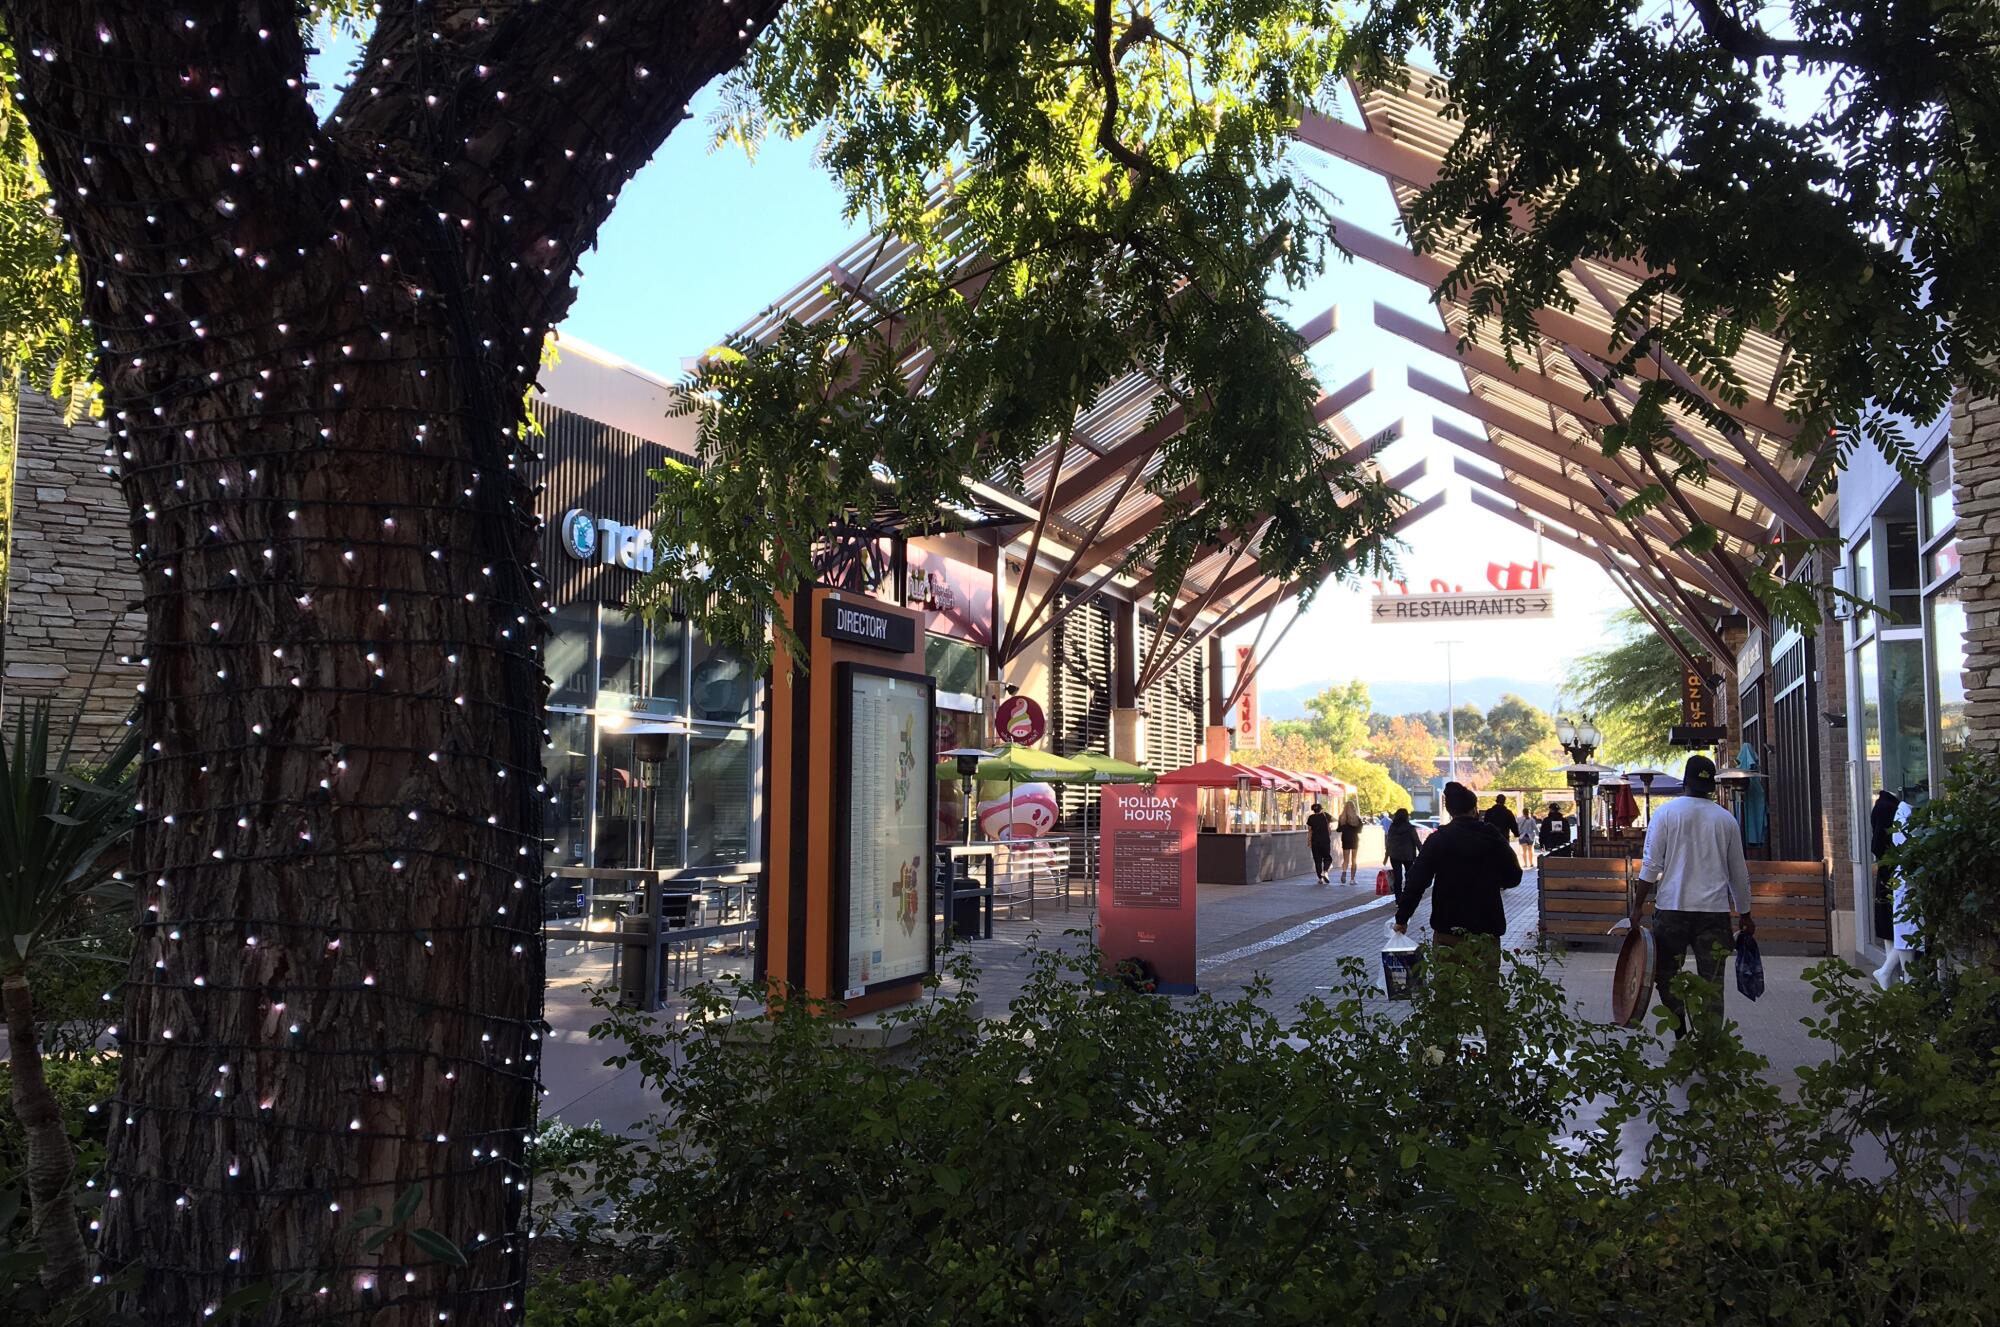 A few people carry bags at an outdoor mall courtyard, where a tree is covered in holiday lights.